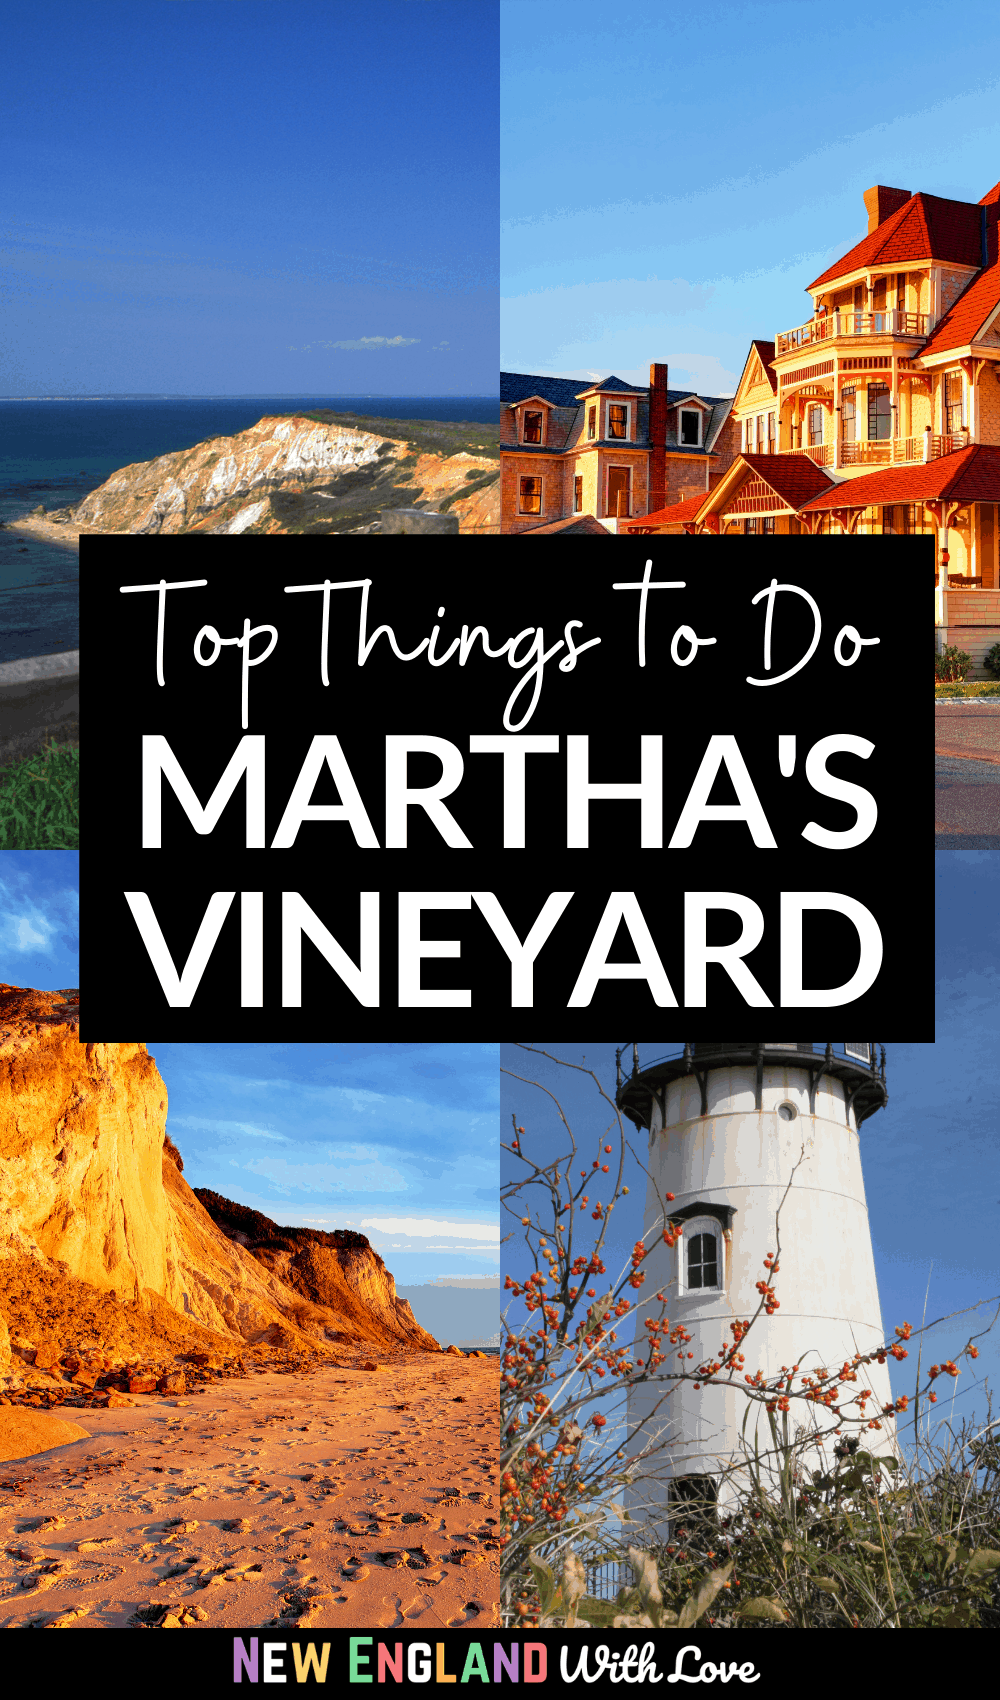 Pinterest sign reading "Top Things To Do Martha's Vineyard"